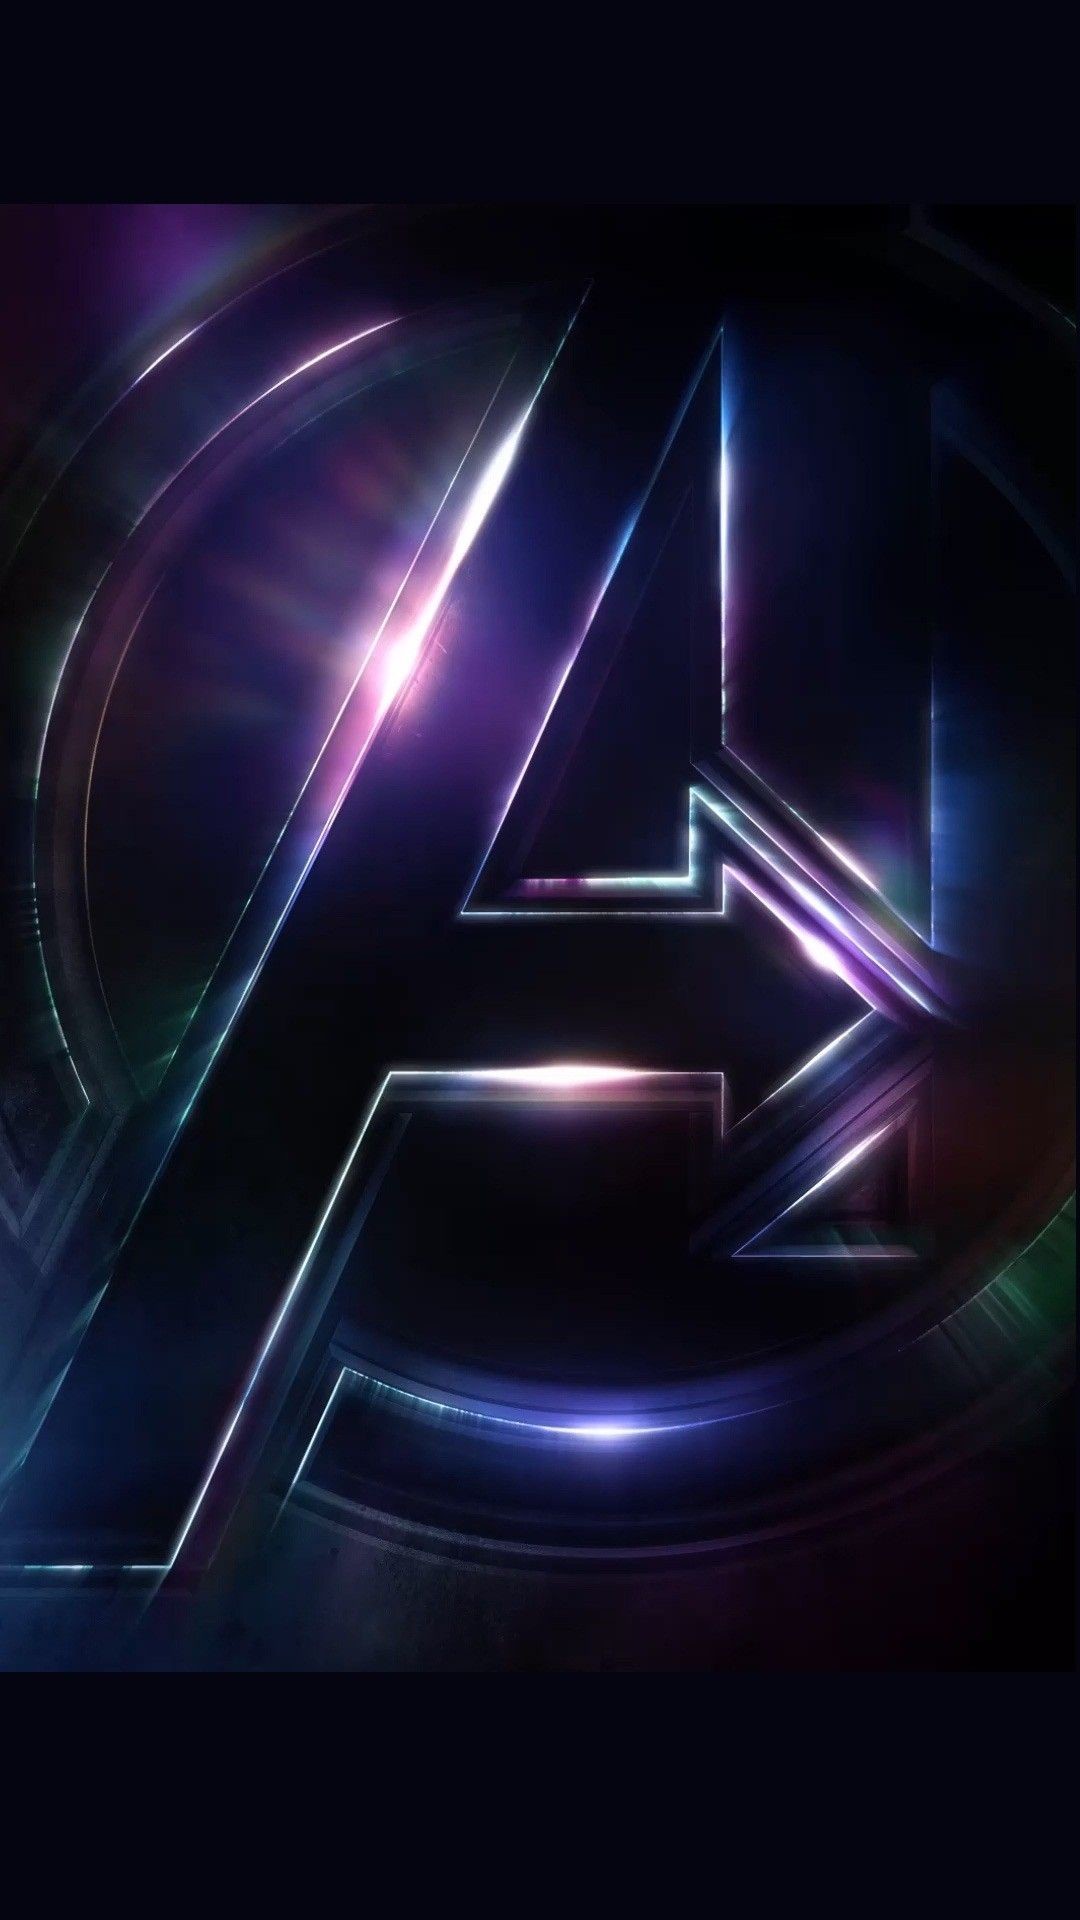 1080x1920 Avengers Infinity War Android Wallpaper - Best Android Wallpapers